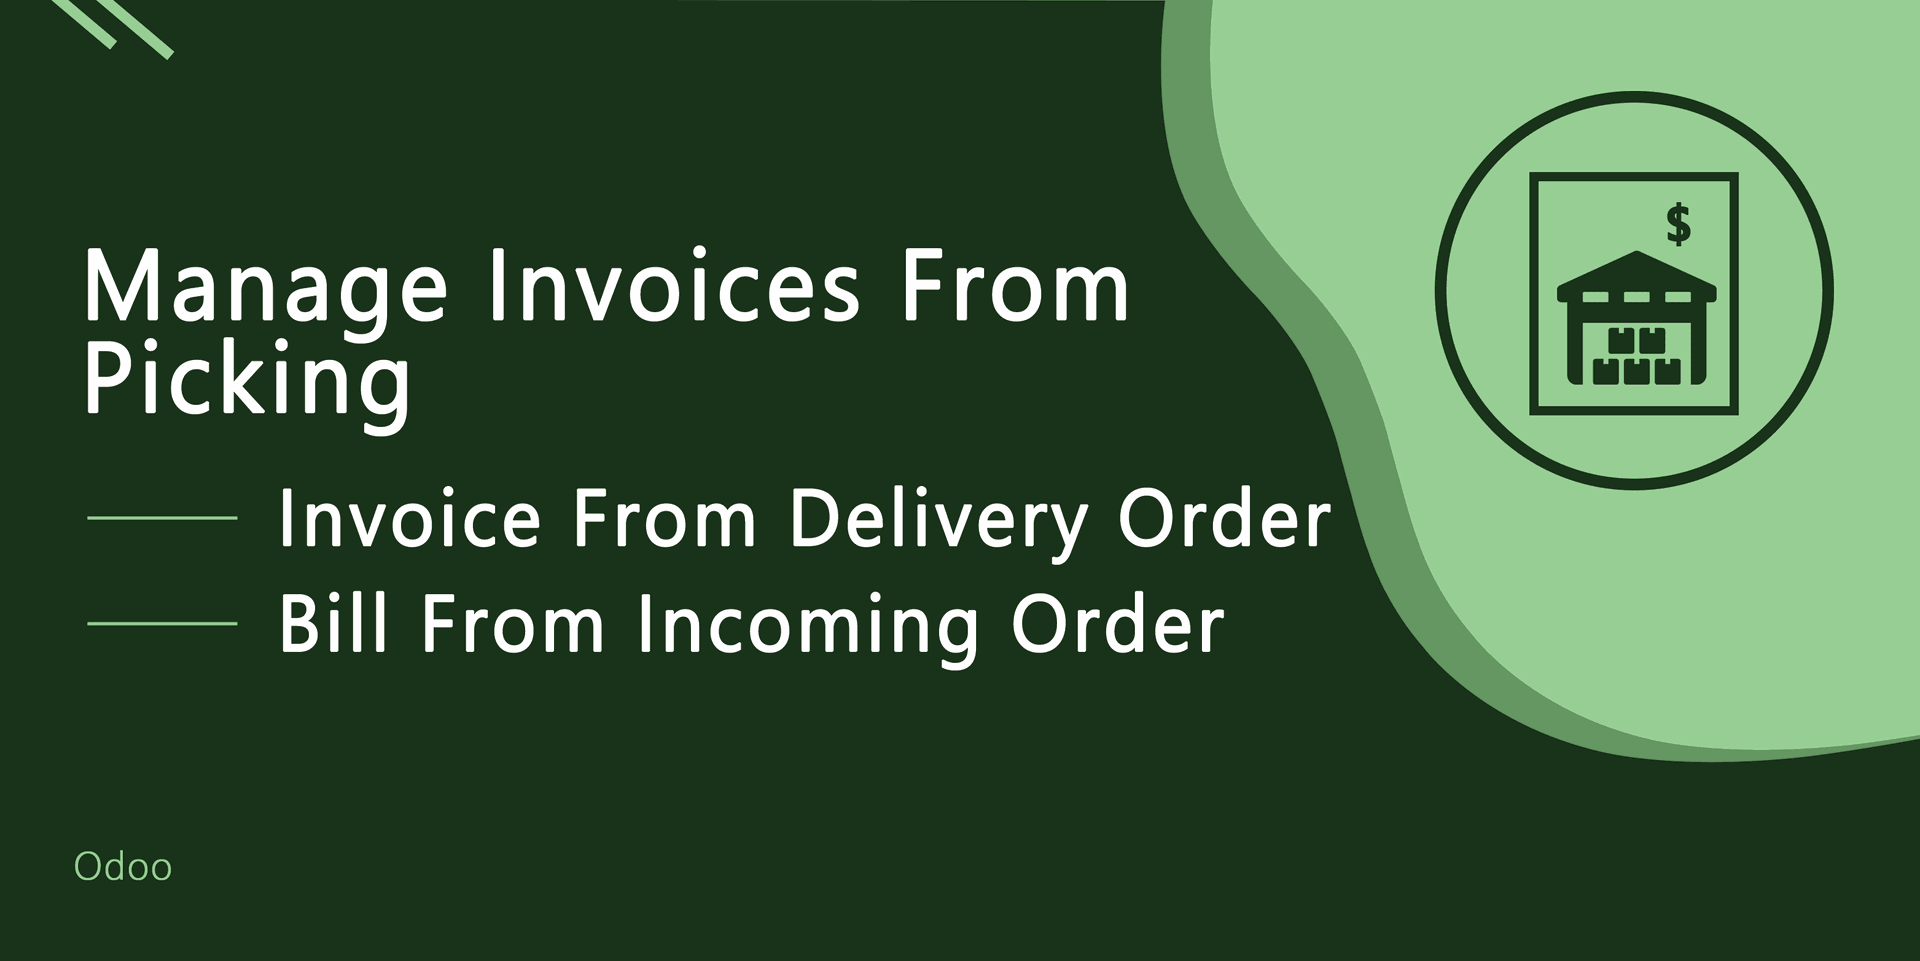 Manage Invoices From Picking
